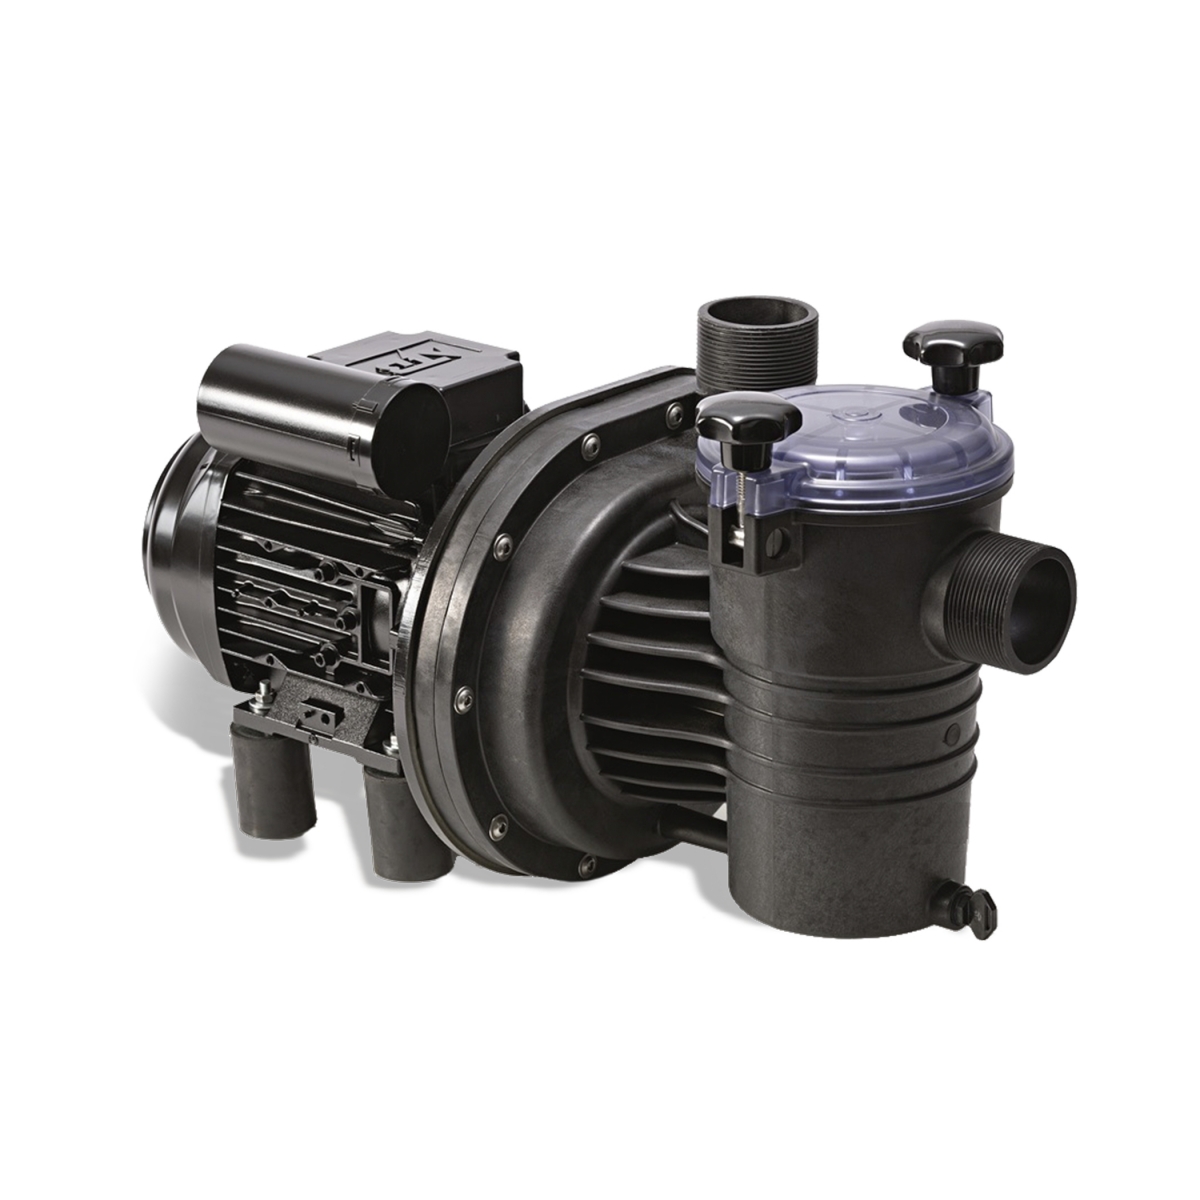 Smart EO11-1 swimming pool pump, flow rate 11 m3/h at 8 m water column, max. head 15 m, P2 motor power 0,55 kW, 230V, monophase, IP55, 2" connection, for pools up to 60 m3 Smart EO11-1 swimming pool pump, flow rate 11 m3/h at 8 m water column, max. head 15 m, P2 motor power 0,55 kW, 230V, monophase, IP55, 2" connection, for pools up to 60 m3